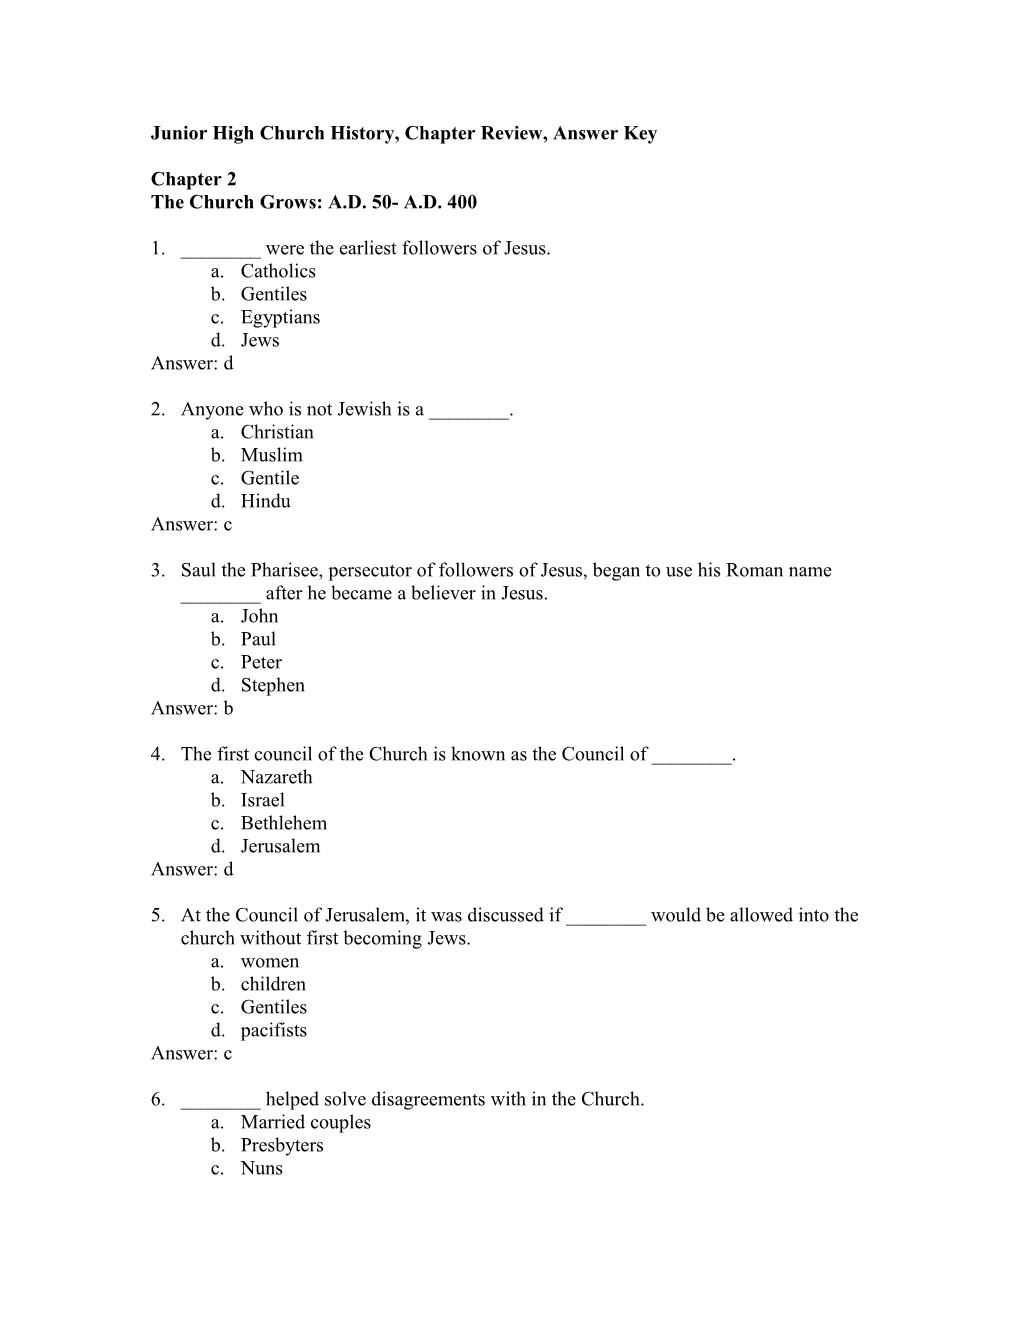 Juniorhighchurch History, Chapter Review, Answer Key